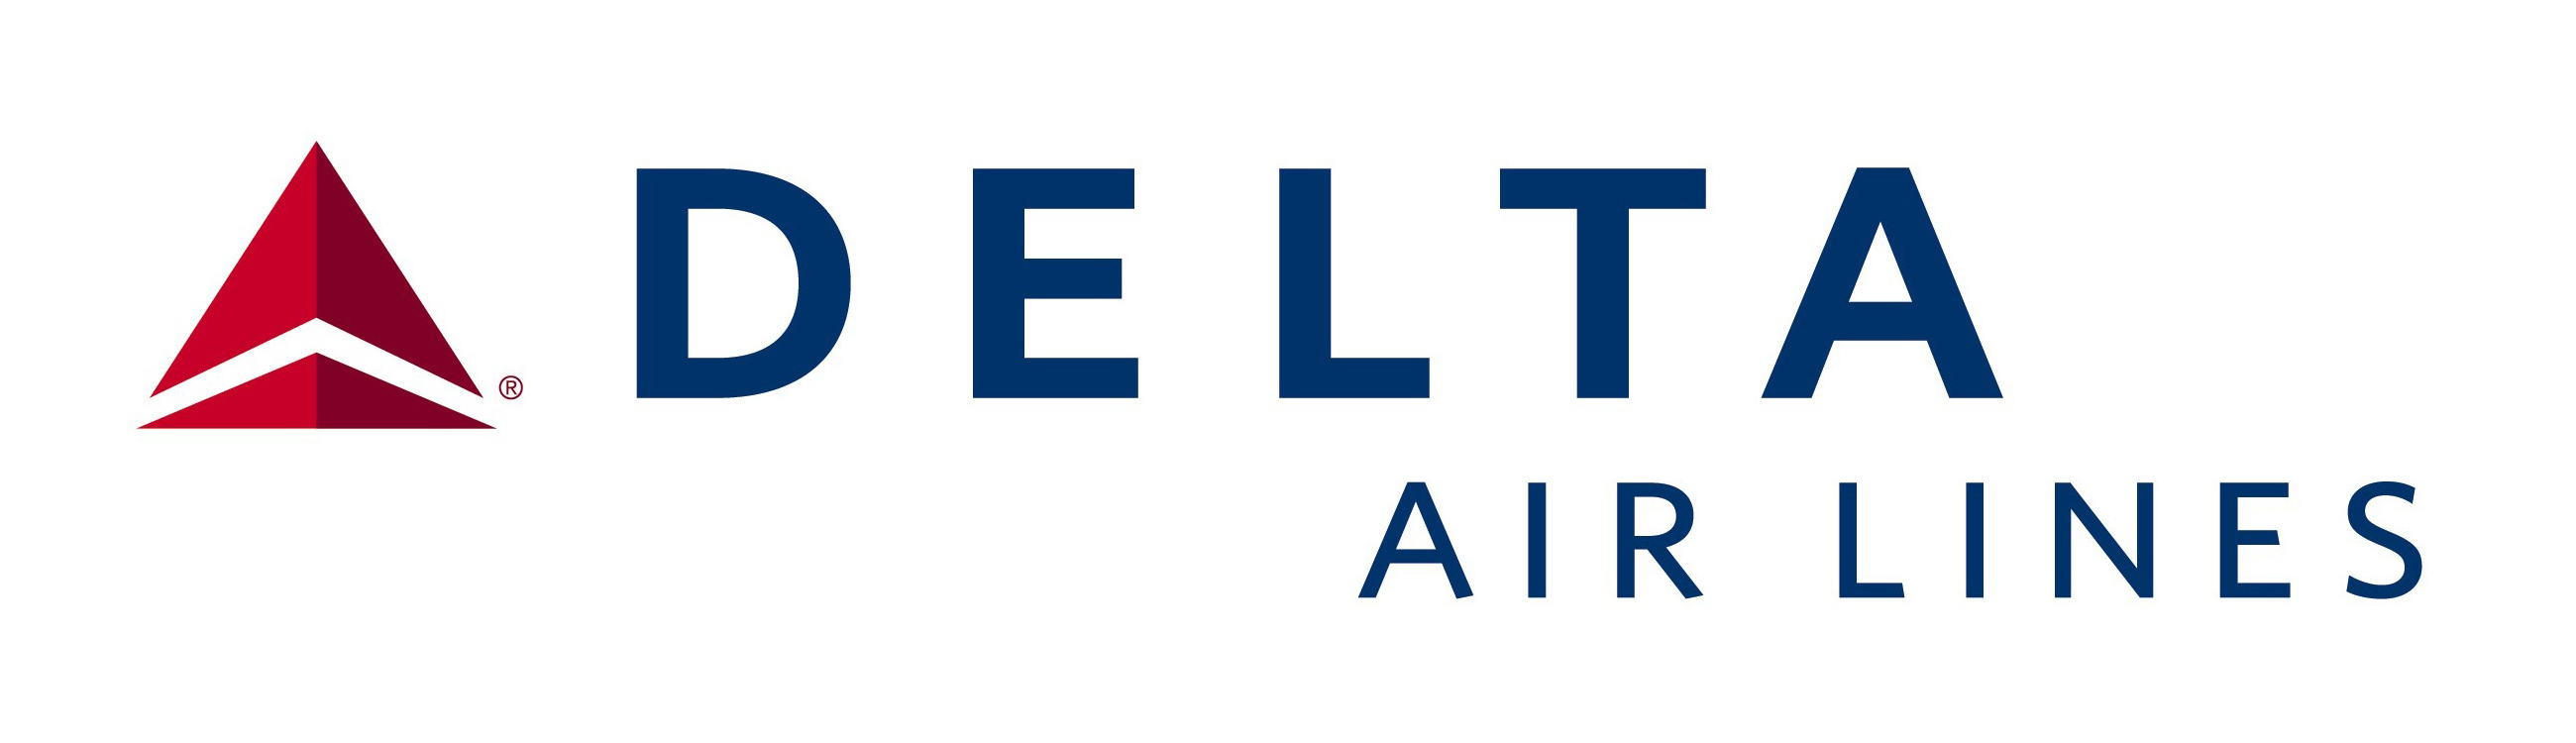 Delta Airlines – Gfnyrd